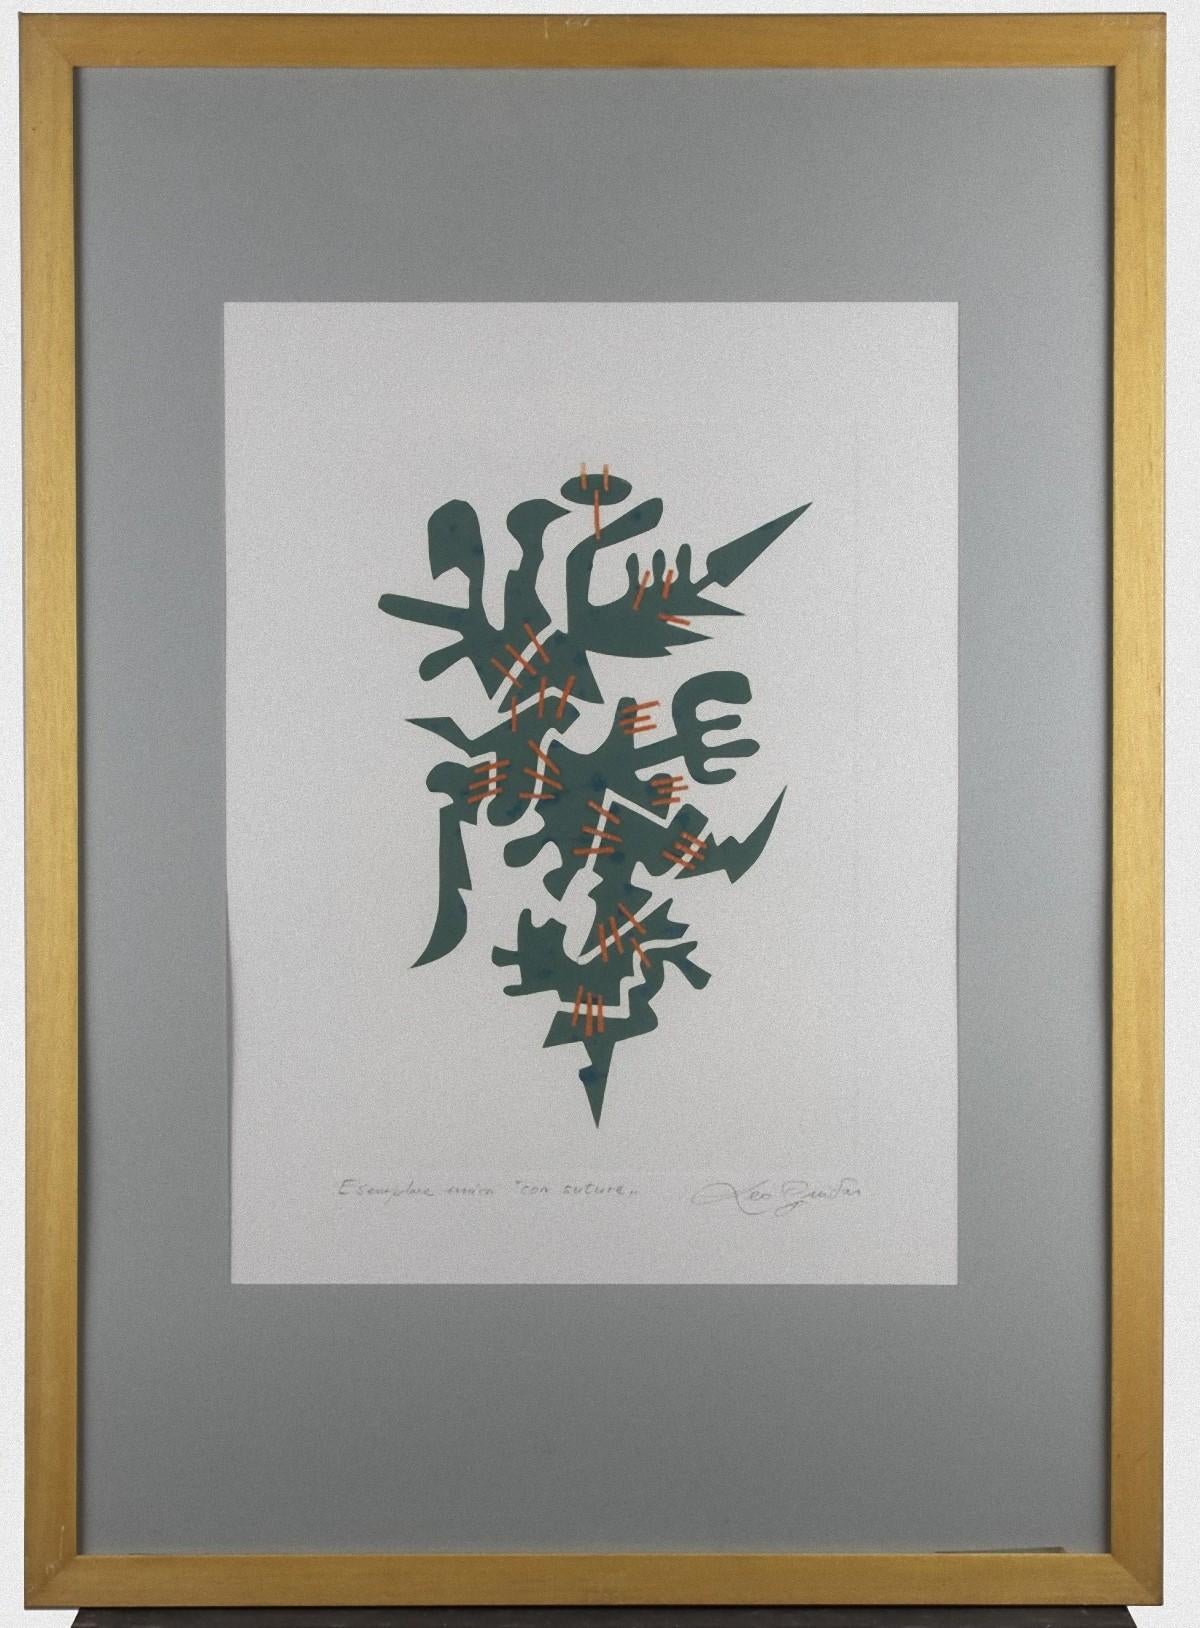 Con Suture is an original Contemporary artwork realized in 1985 by the italian artist Leo Guida (1992 - 2017).

Original Lithograph and Chalchography, unique specimen.

Hand-signed and titled in pencil on the lower margin by the artist: Esemplare